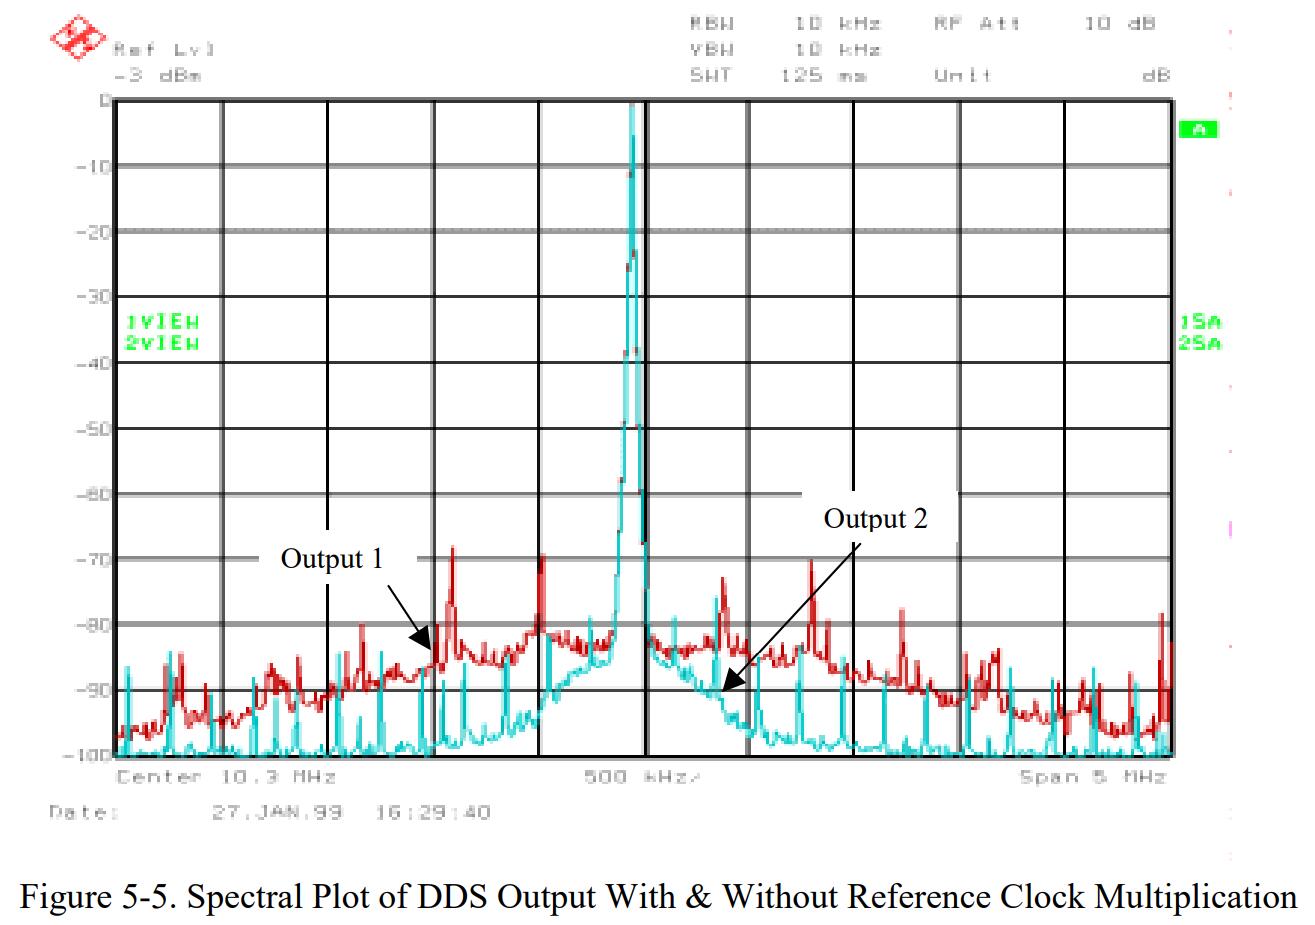 Spectral Plot of DDS Output with & without Reference Clock Multiplication